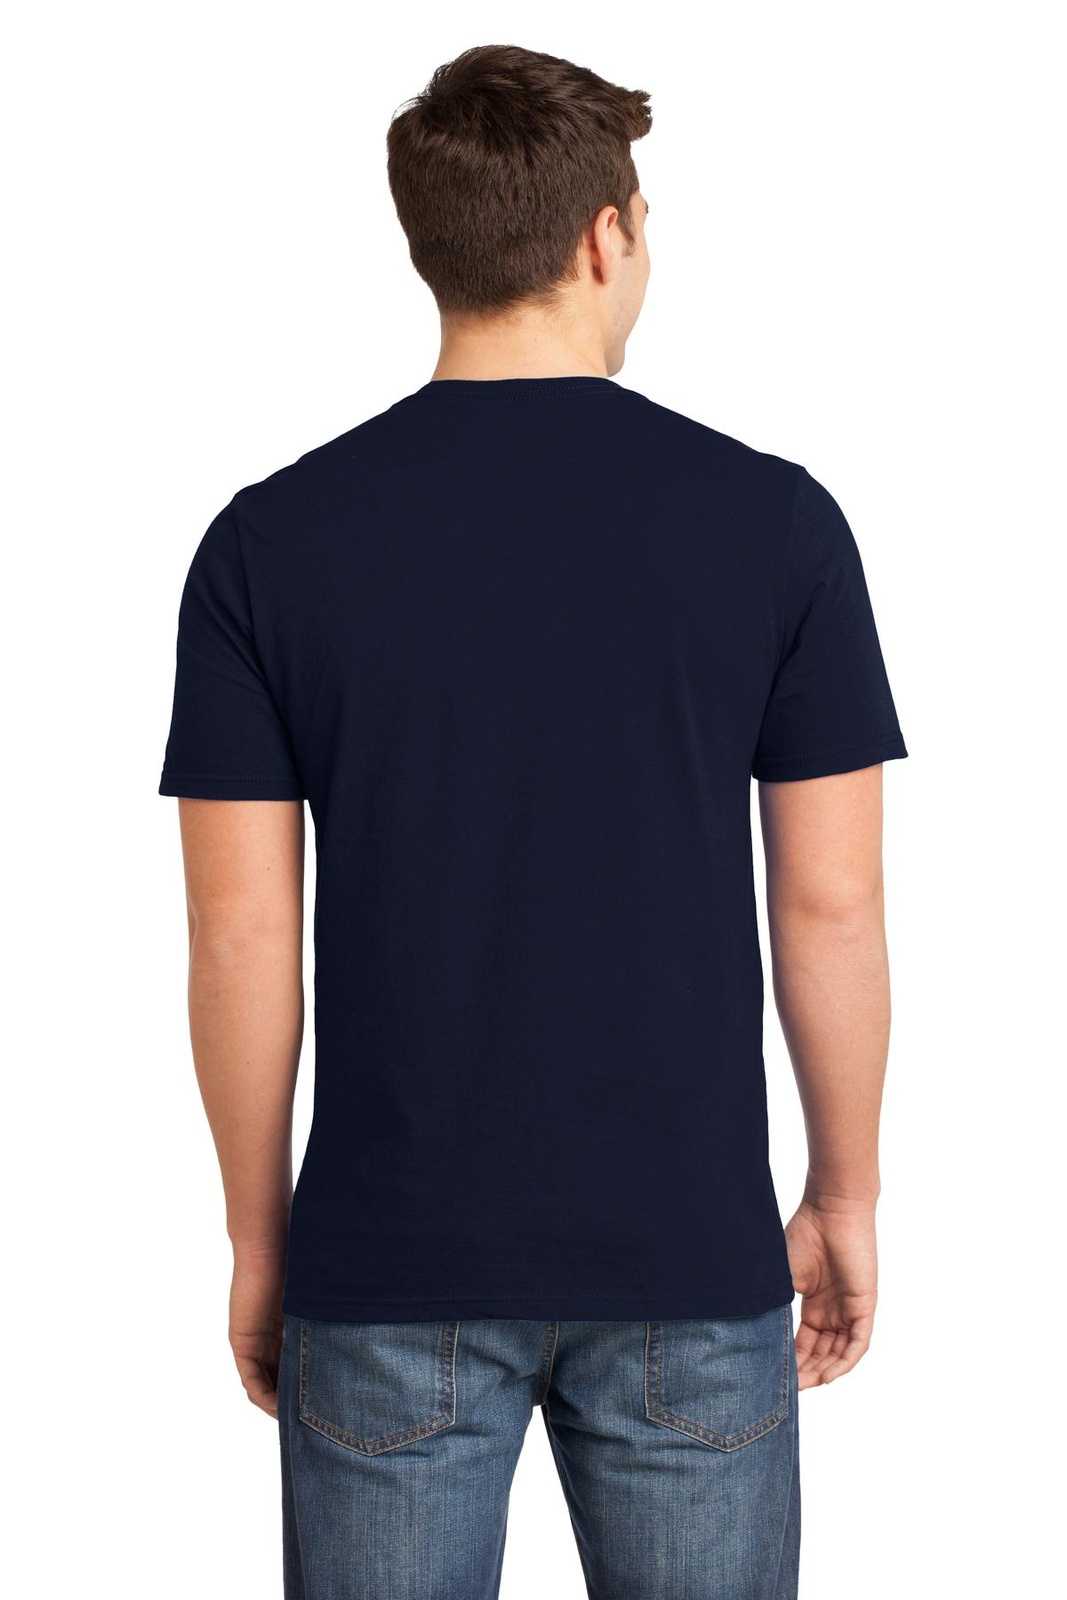 District DT6000 Very Important Tee - New Navy - HIT a Double - 2